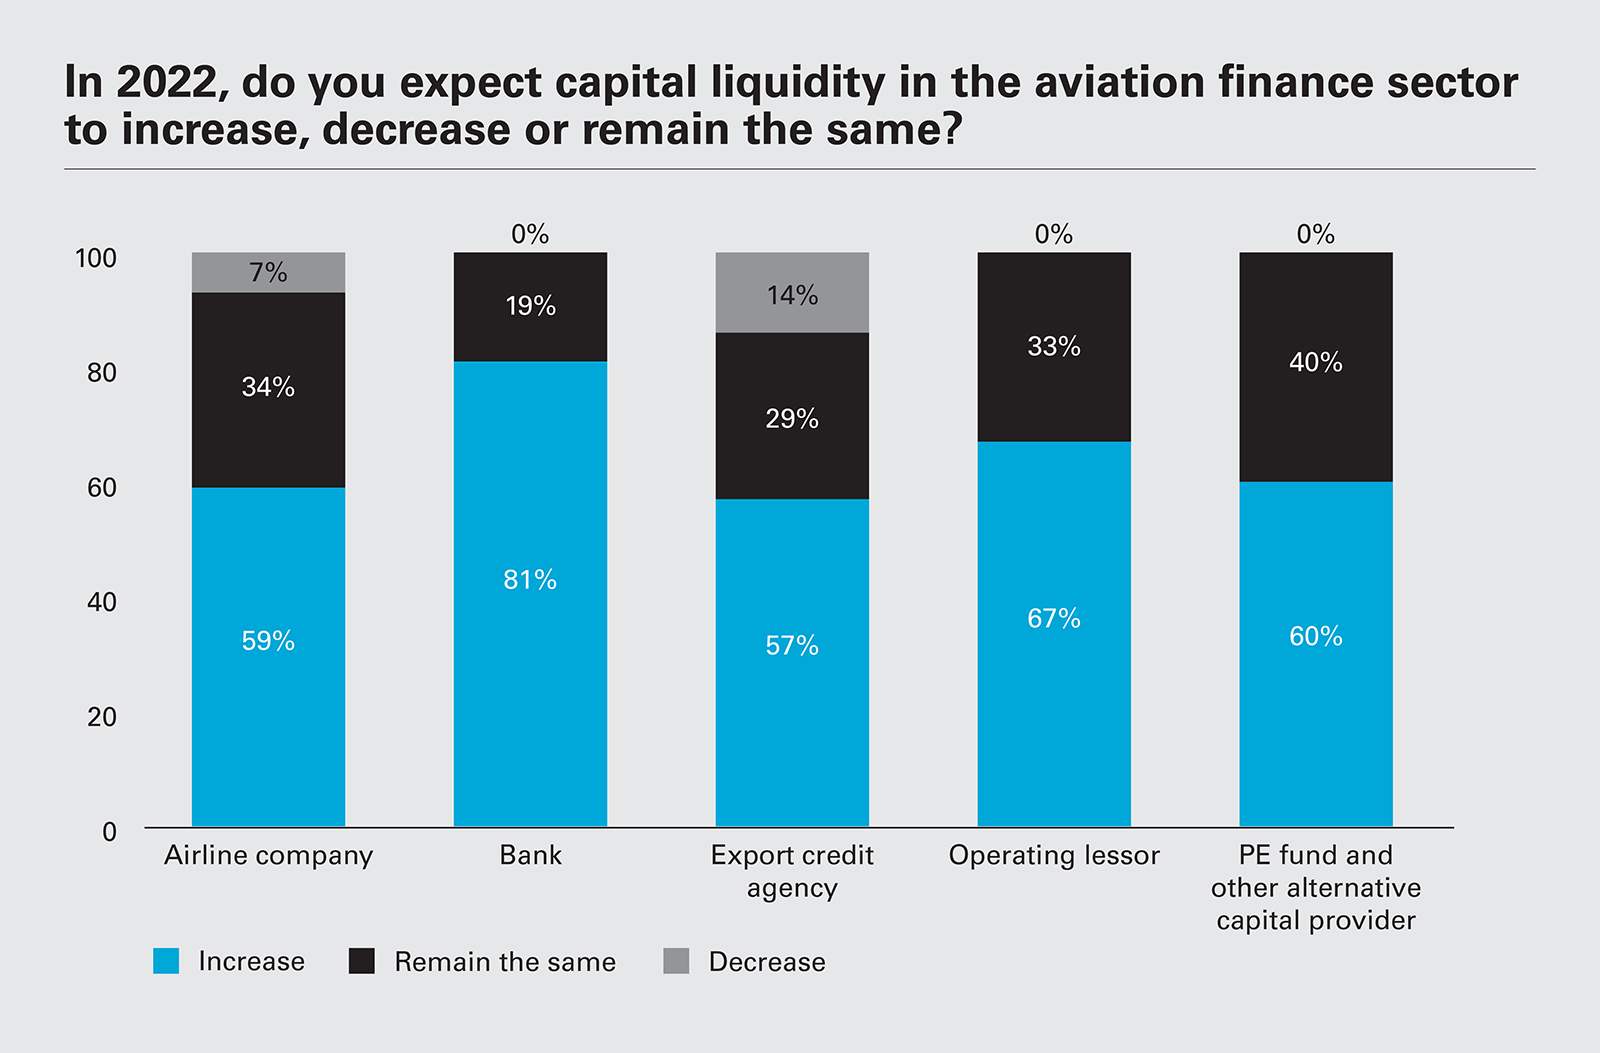 In 2022, do you expect capital liquidity in the aviation finance sector to increase, decrease or remain the same?